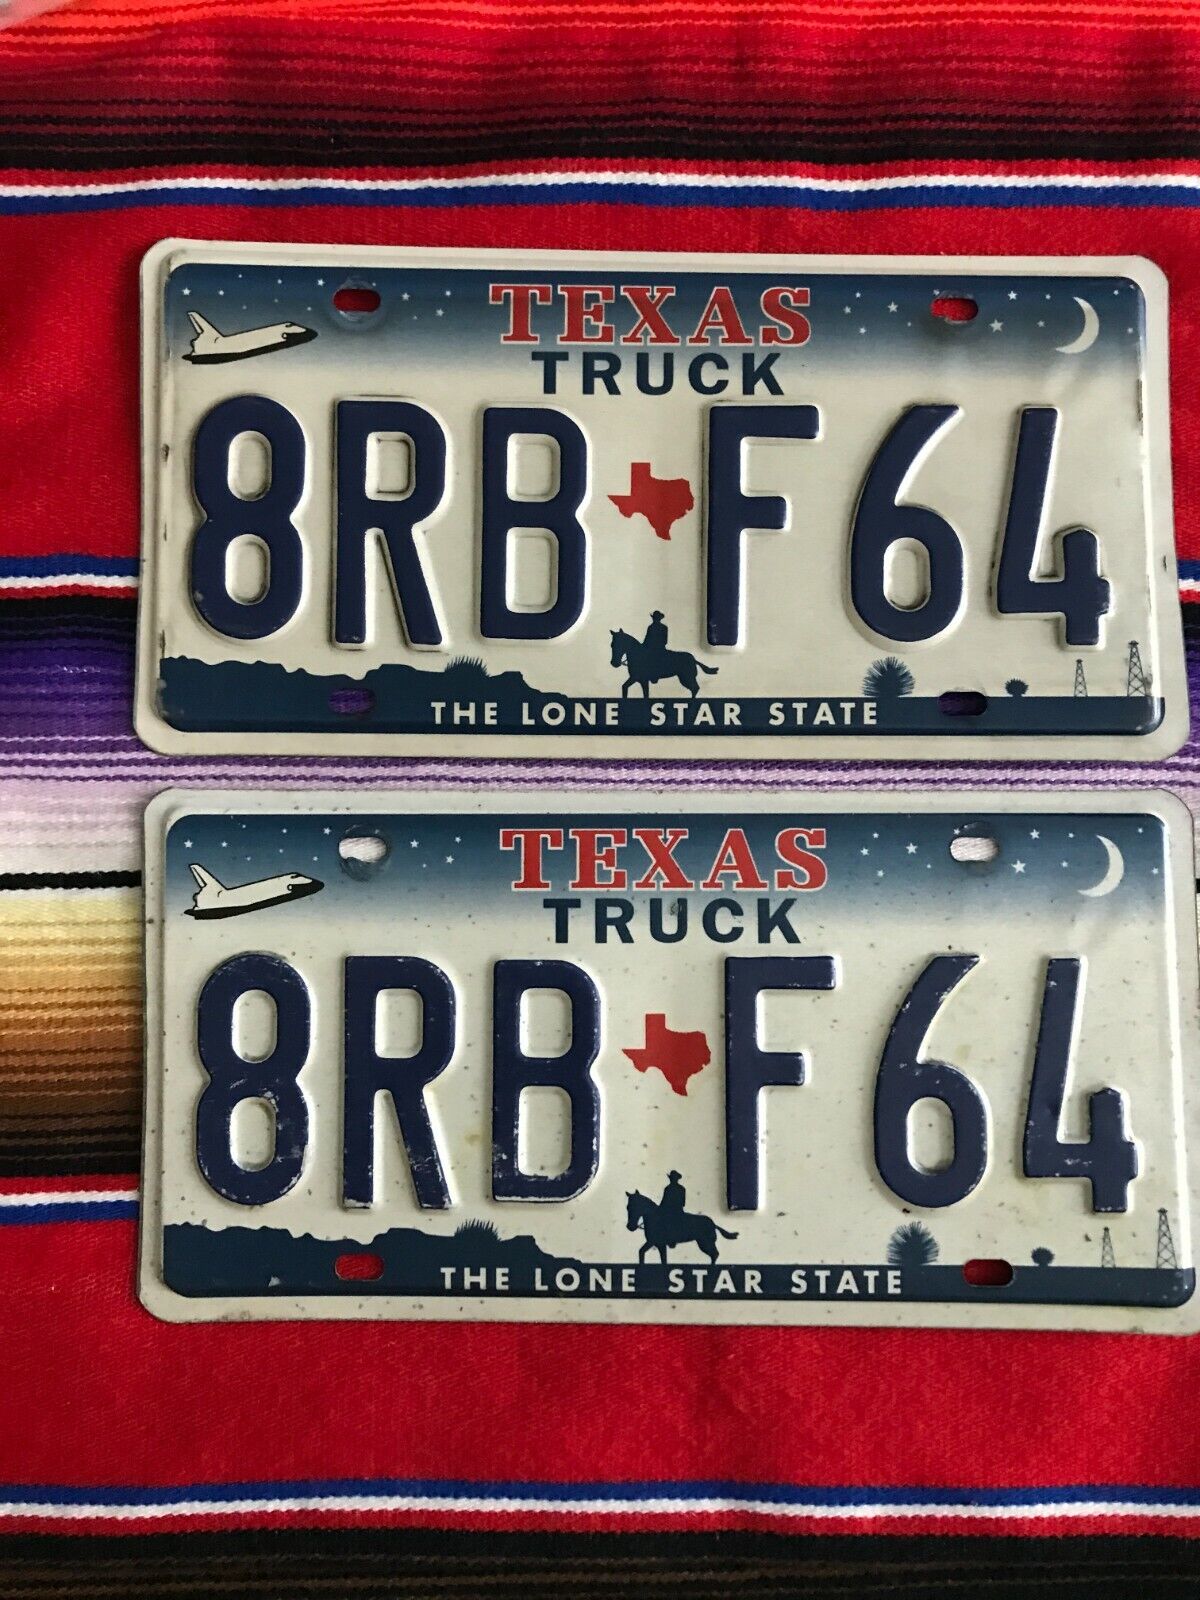 2000-2001-2002-2003-2004 TEXAS  TRUCK  LICENSE PLATES SPACE SHUTTLE  8RBF64